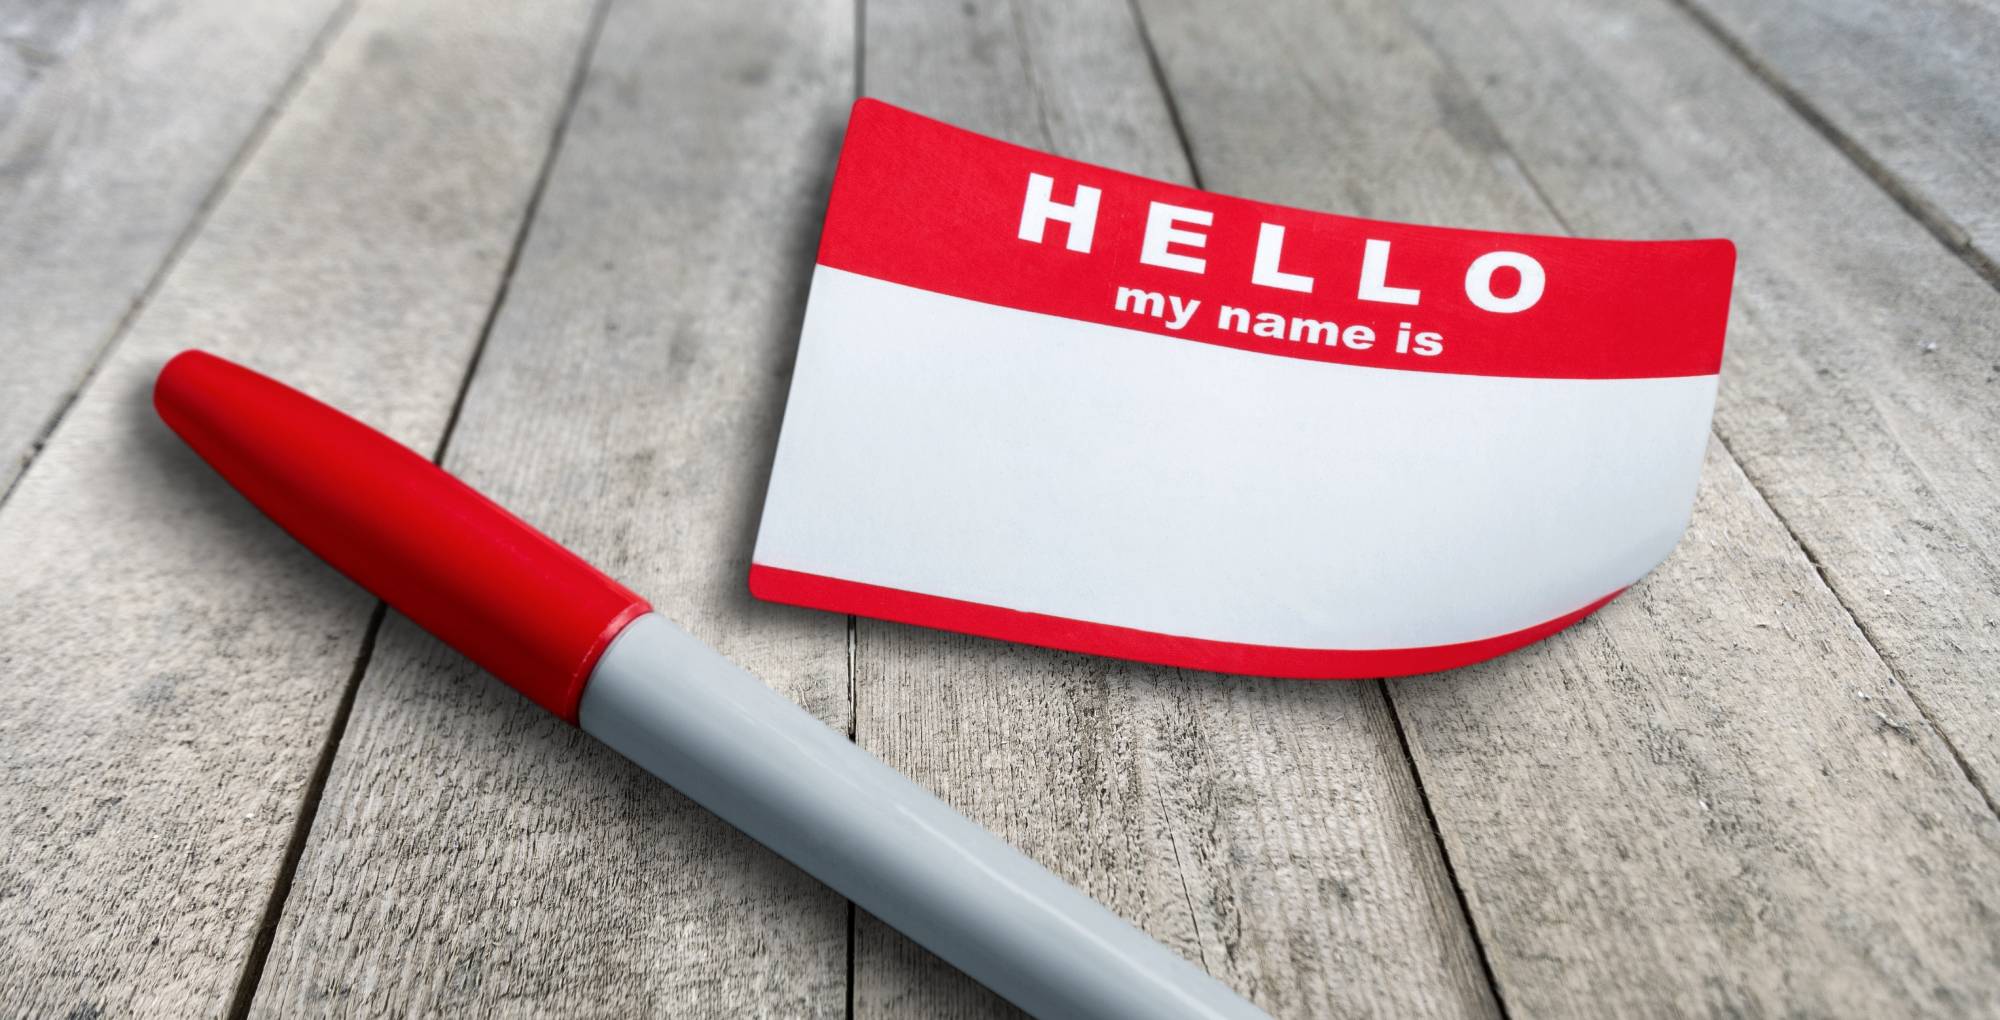 6 Reasons You May Want to Change Your Name